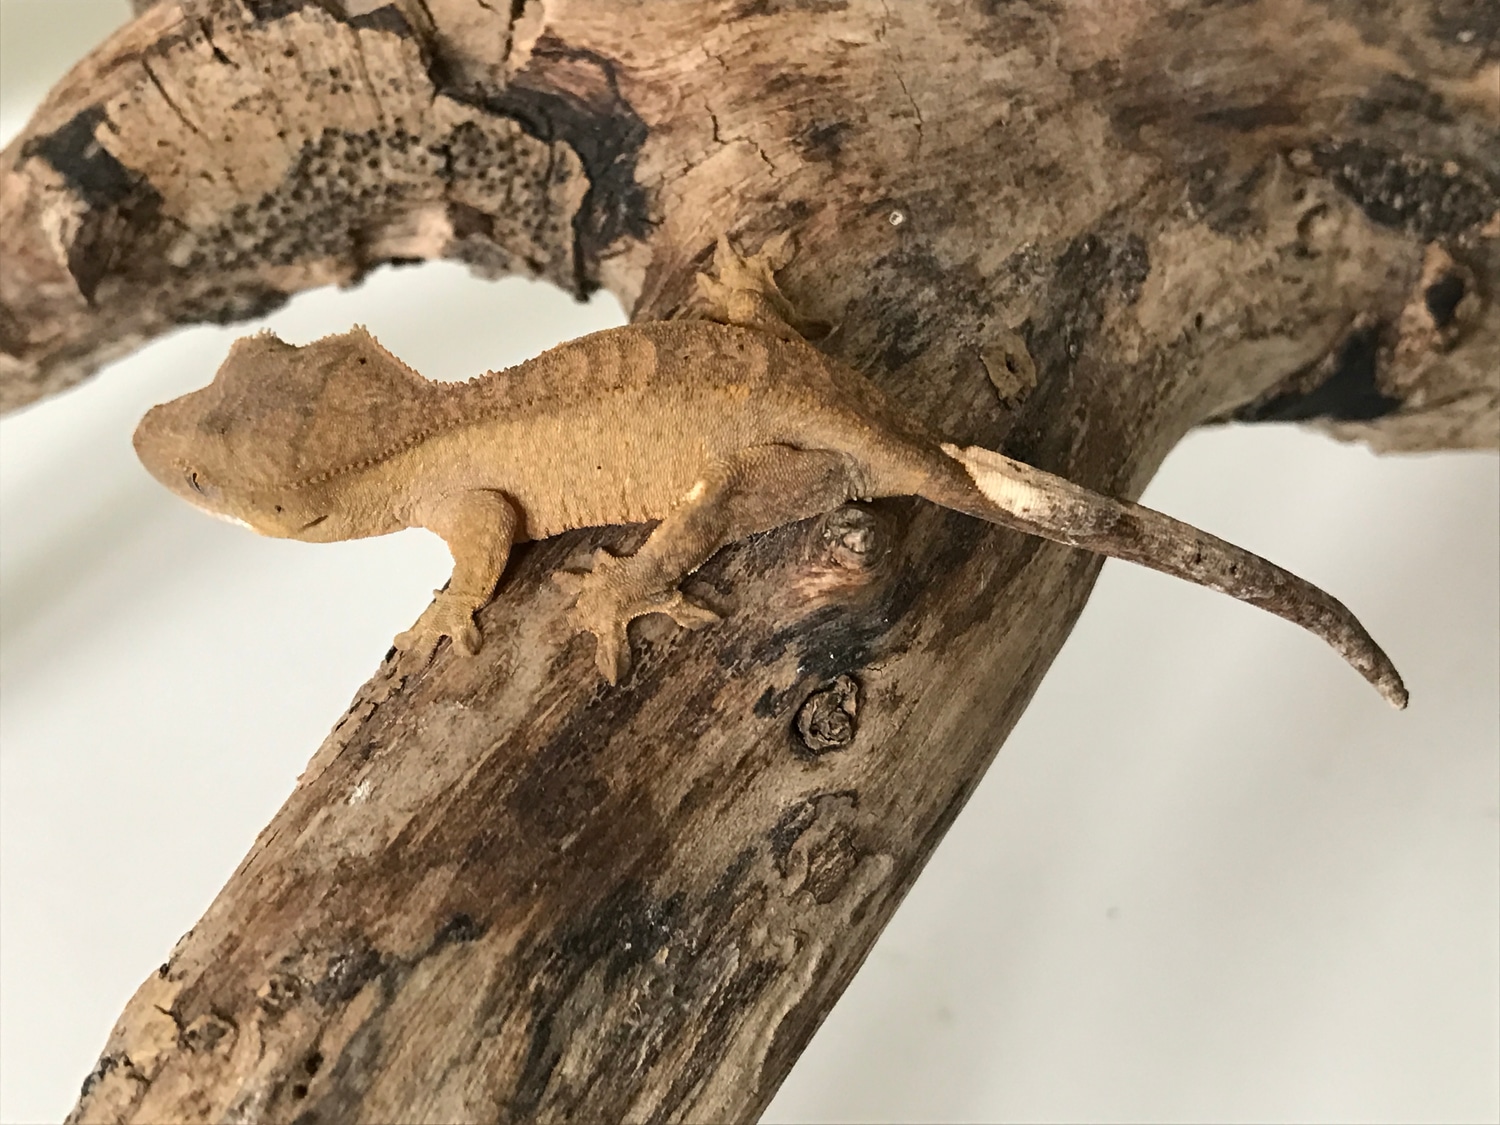 Yellow Patternless Crested Gecko by Green Stuff Exotics